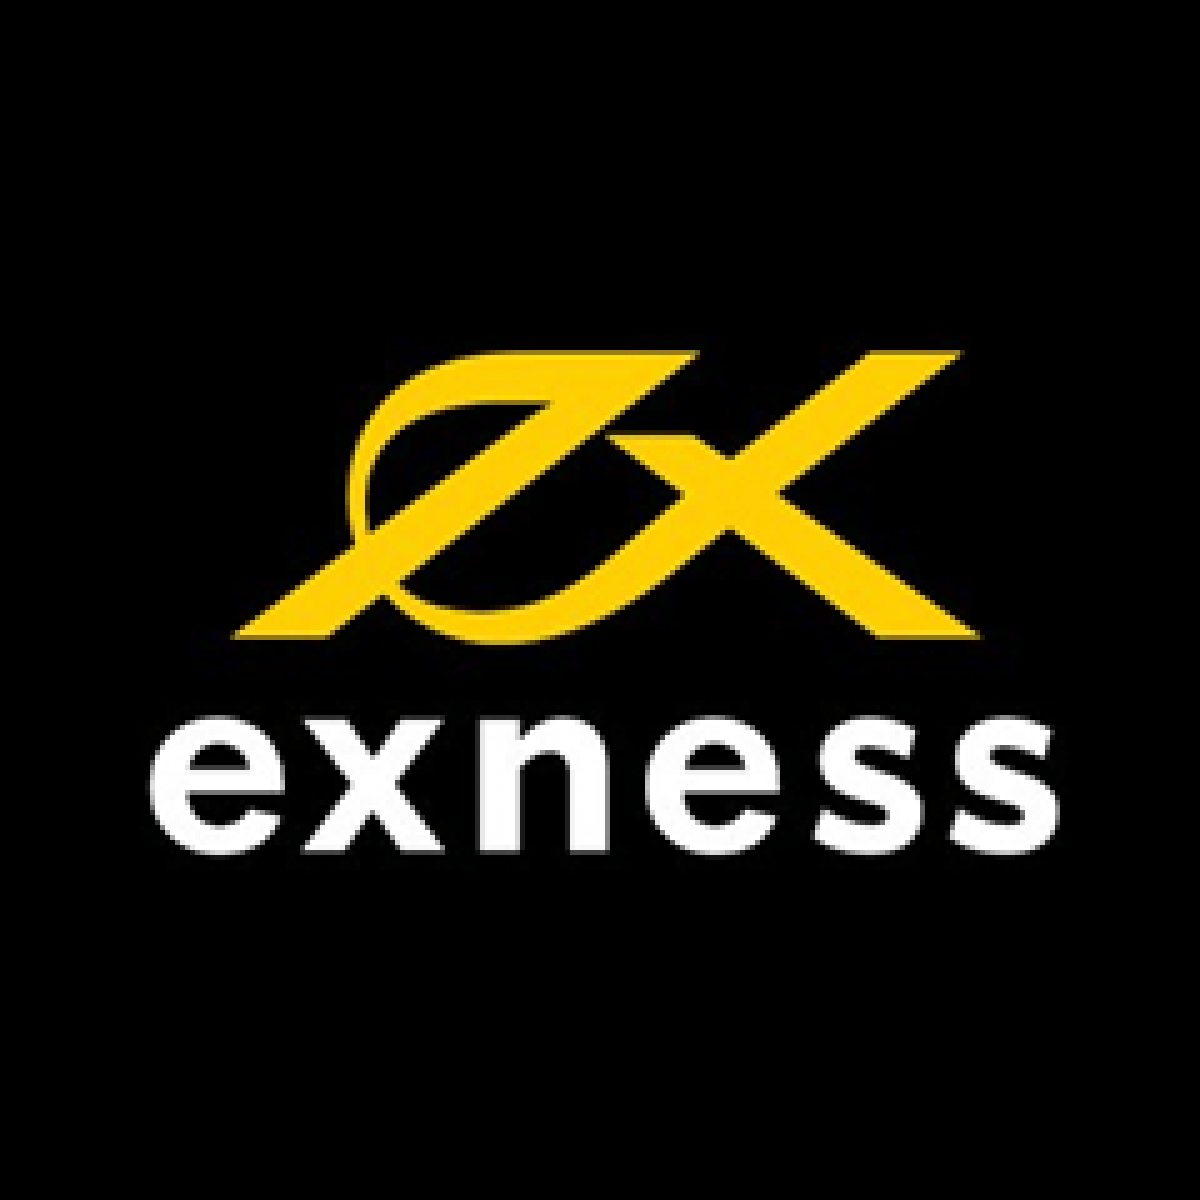 Are You Good At Exness? Here's A Quick Quiz To Find Out